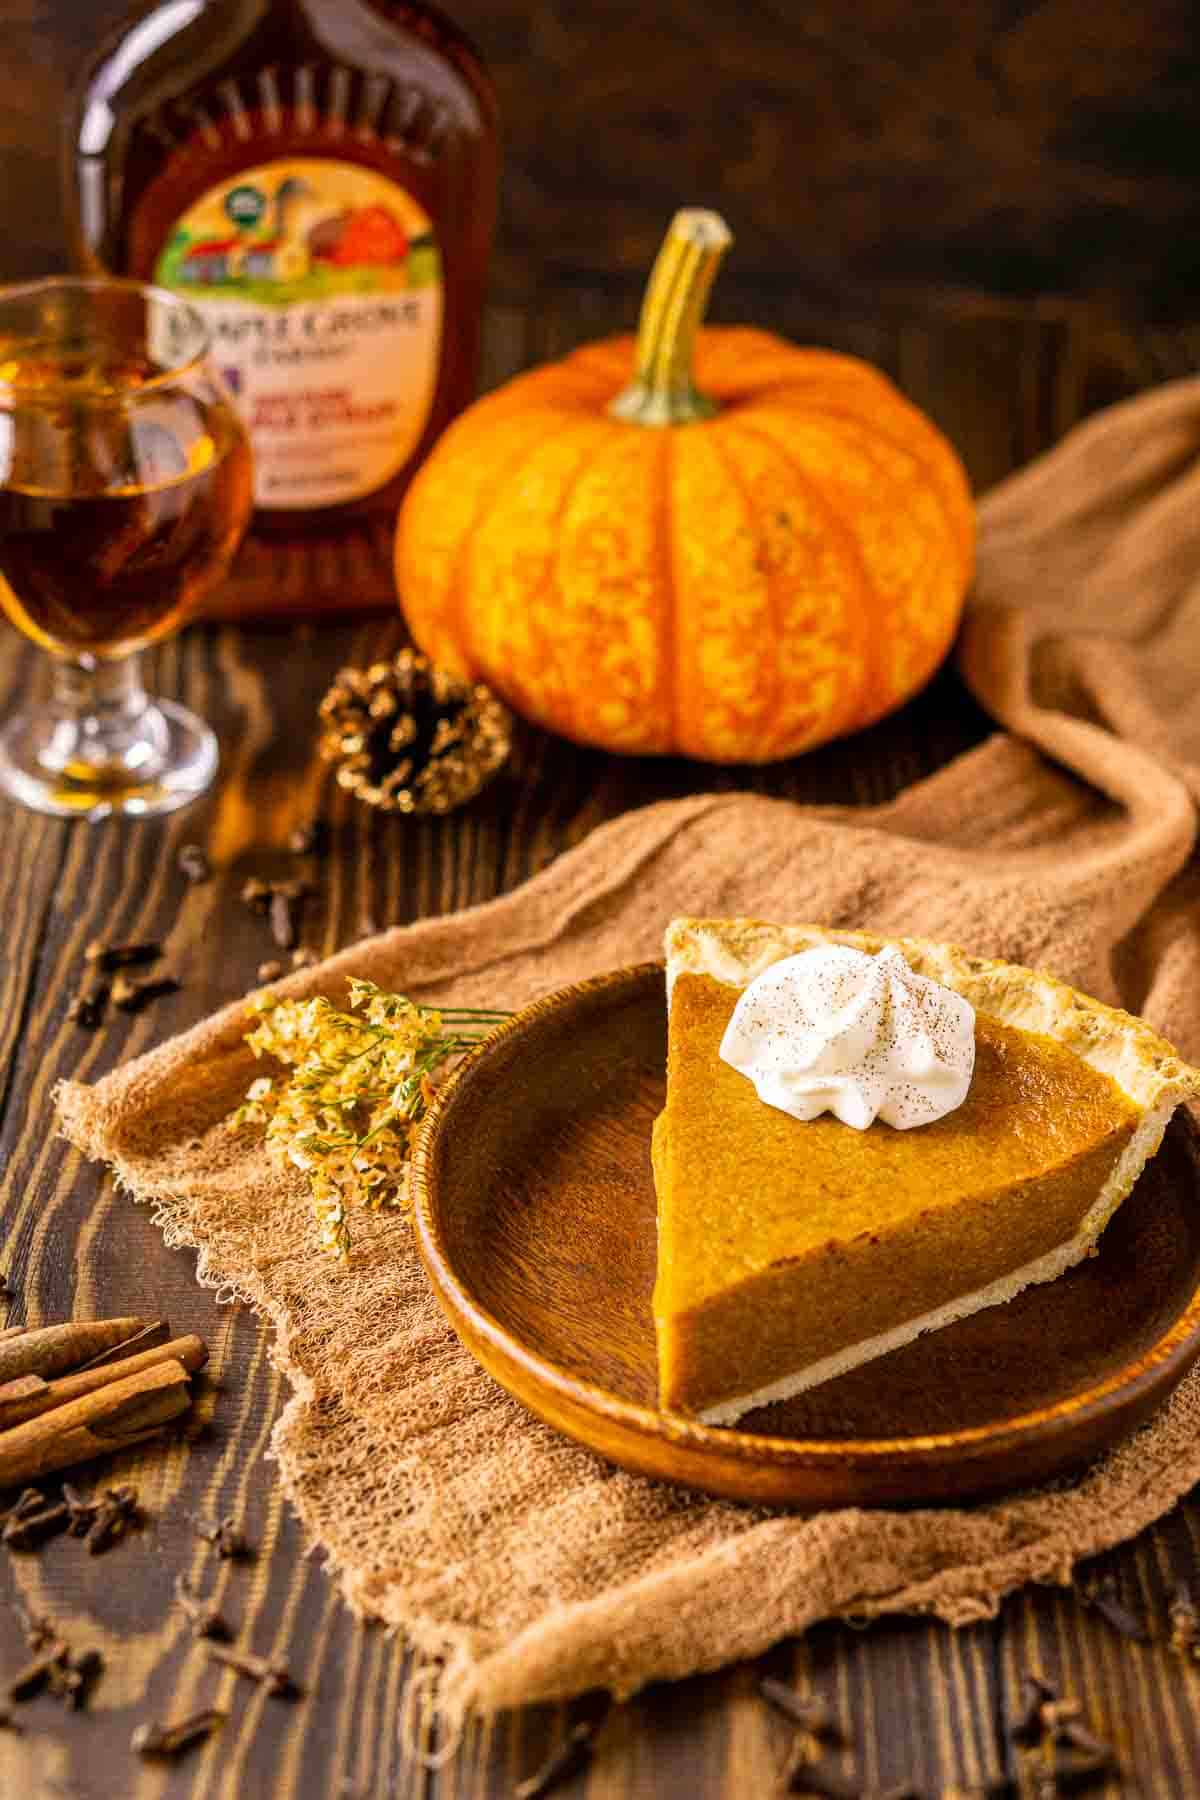 A slice of the maple-bourbon pumpkin pie on a wooden plate with a small pumpkin in the background and spices around it.